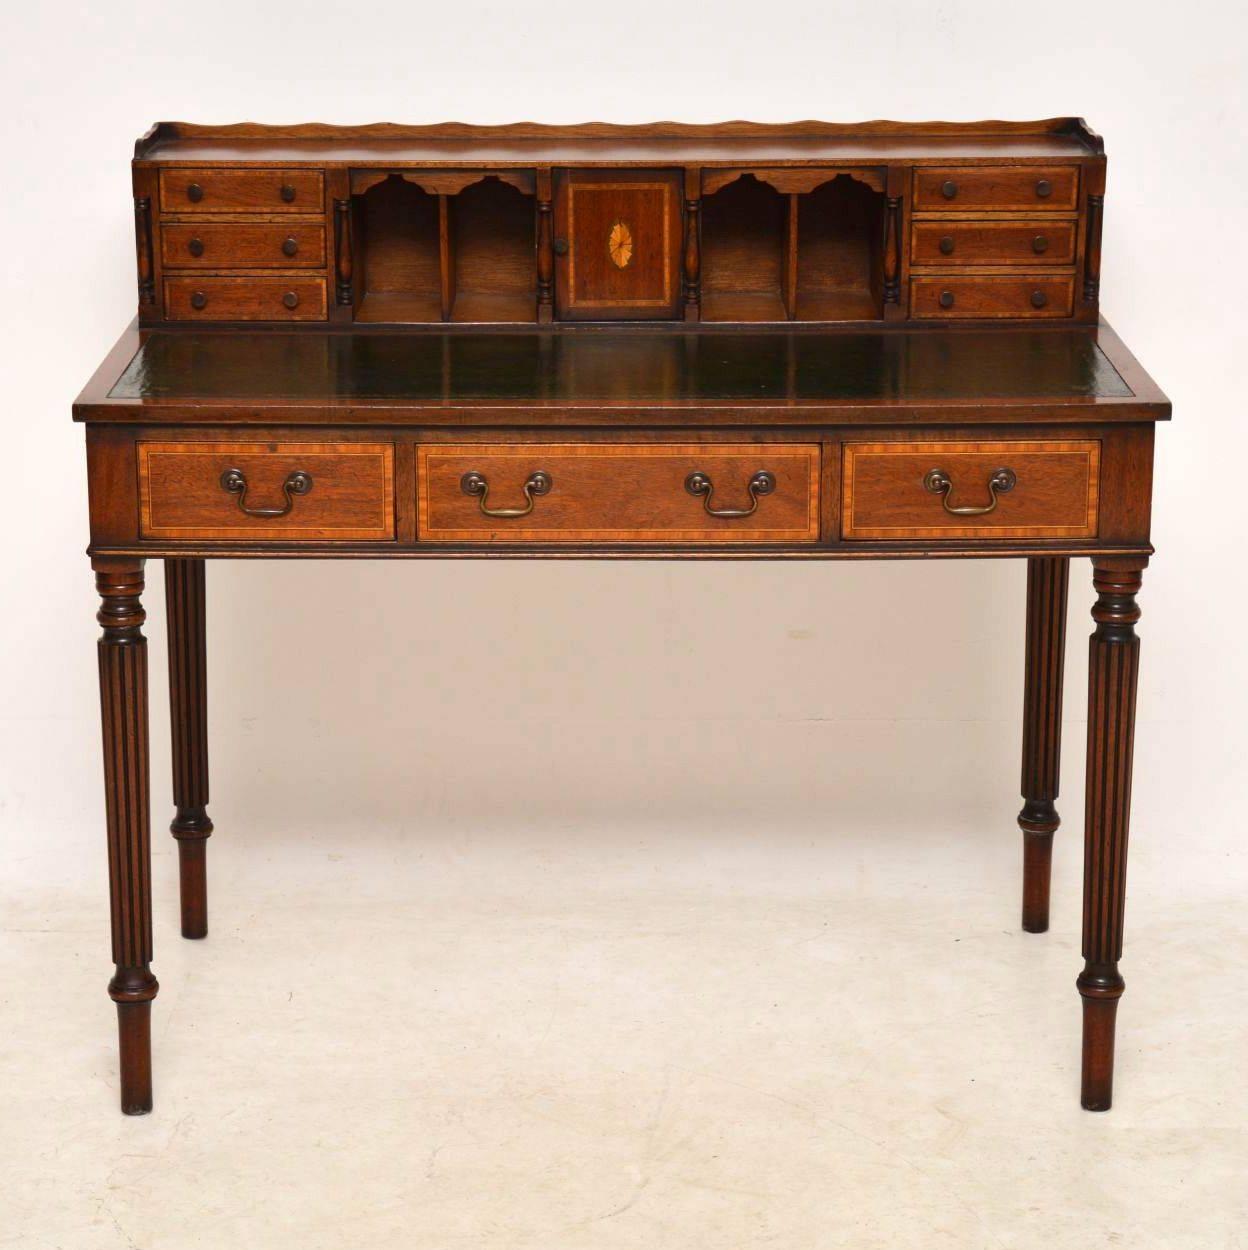 Antique mahogany and satinwood inlaid writing table desk with a useful and decorative back section. This desk is Sheraton style and I would date it to circa 1930s period. The top raised section has two banks of three drawers, four compartments and a